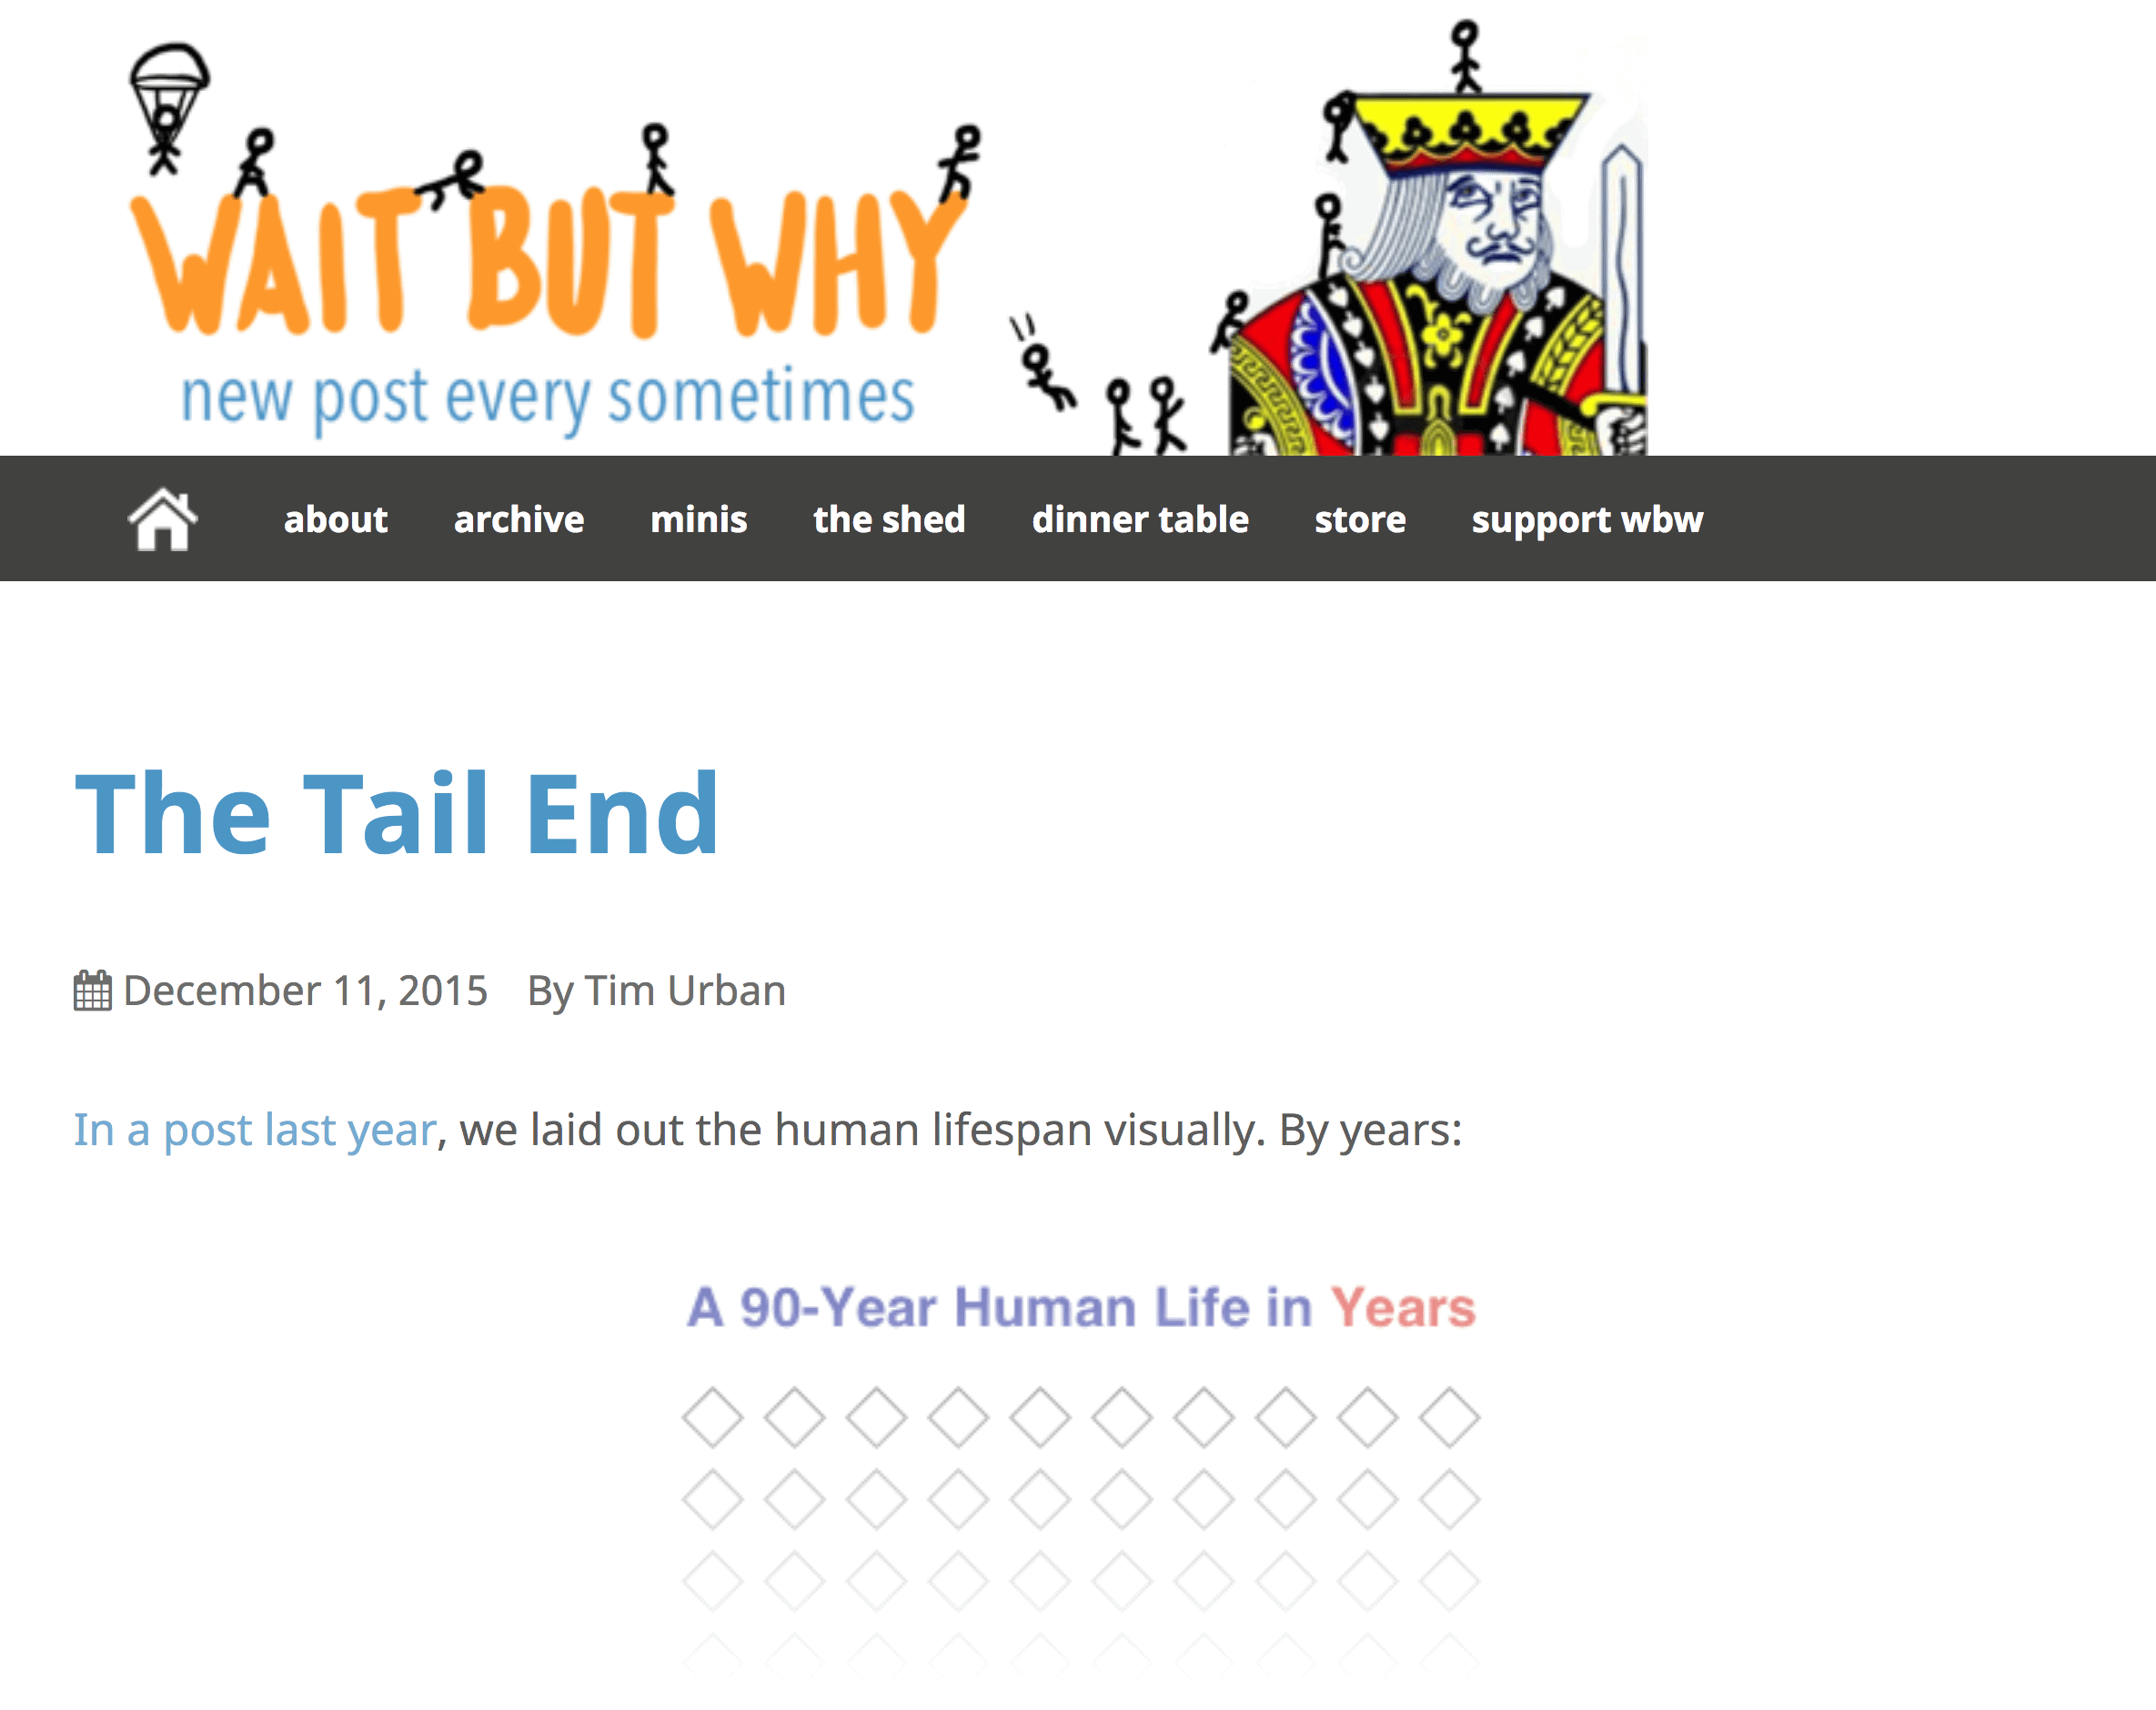 The tail end